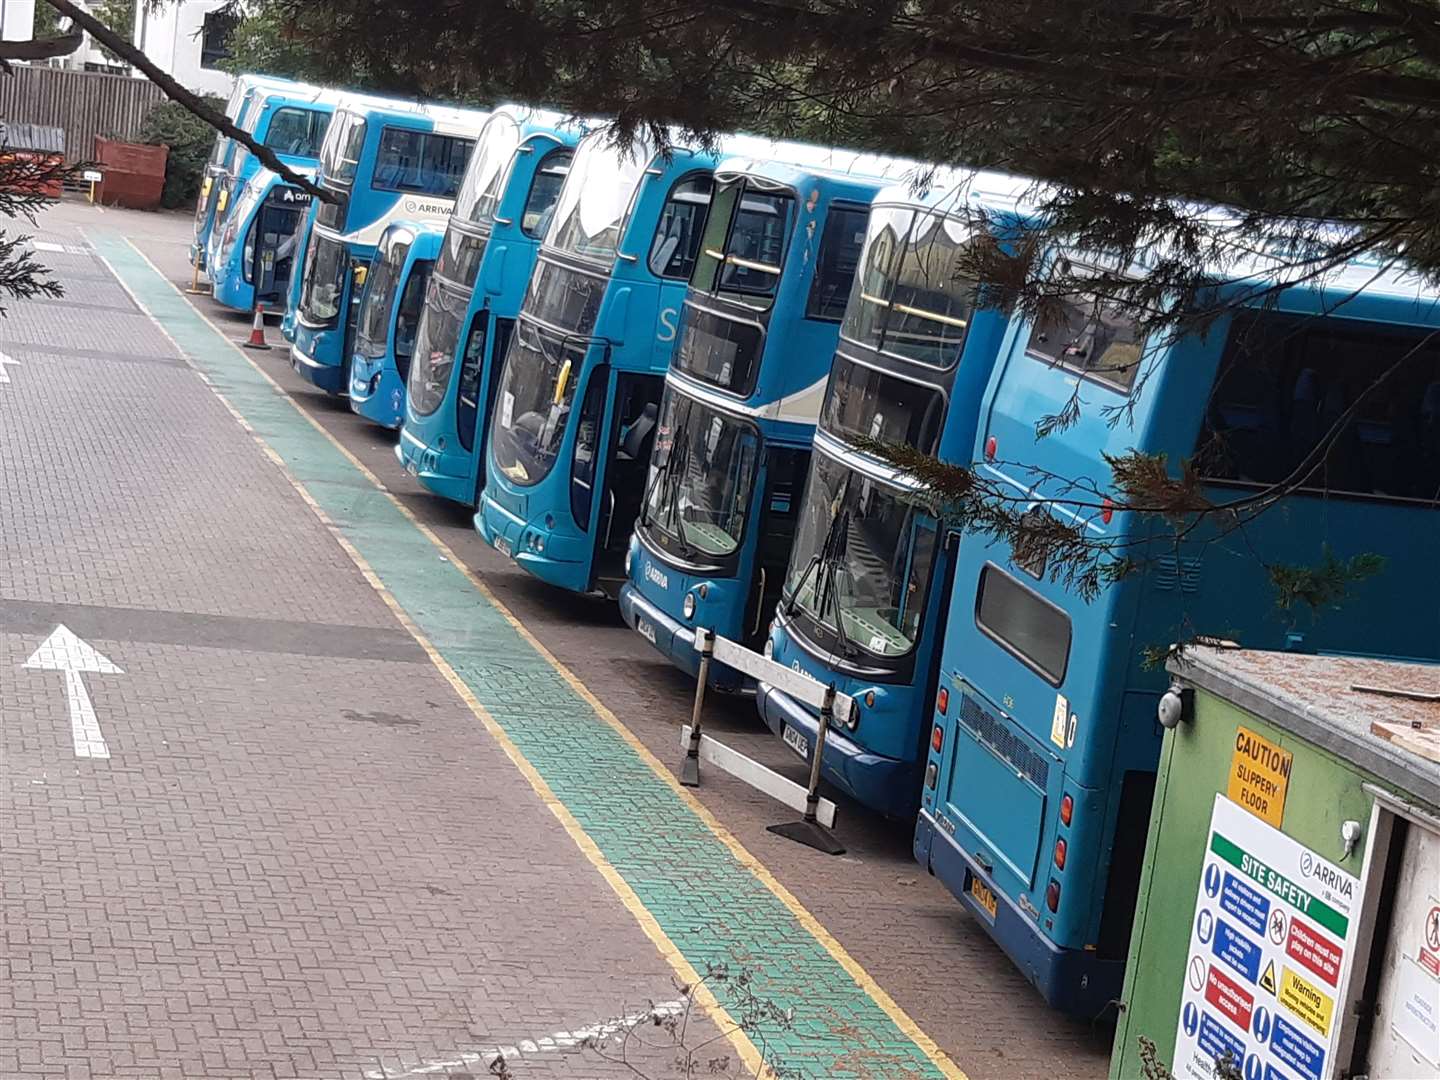 The Arriva bus depot in Armstrong Road, Maidstone